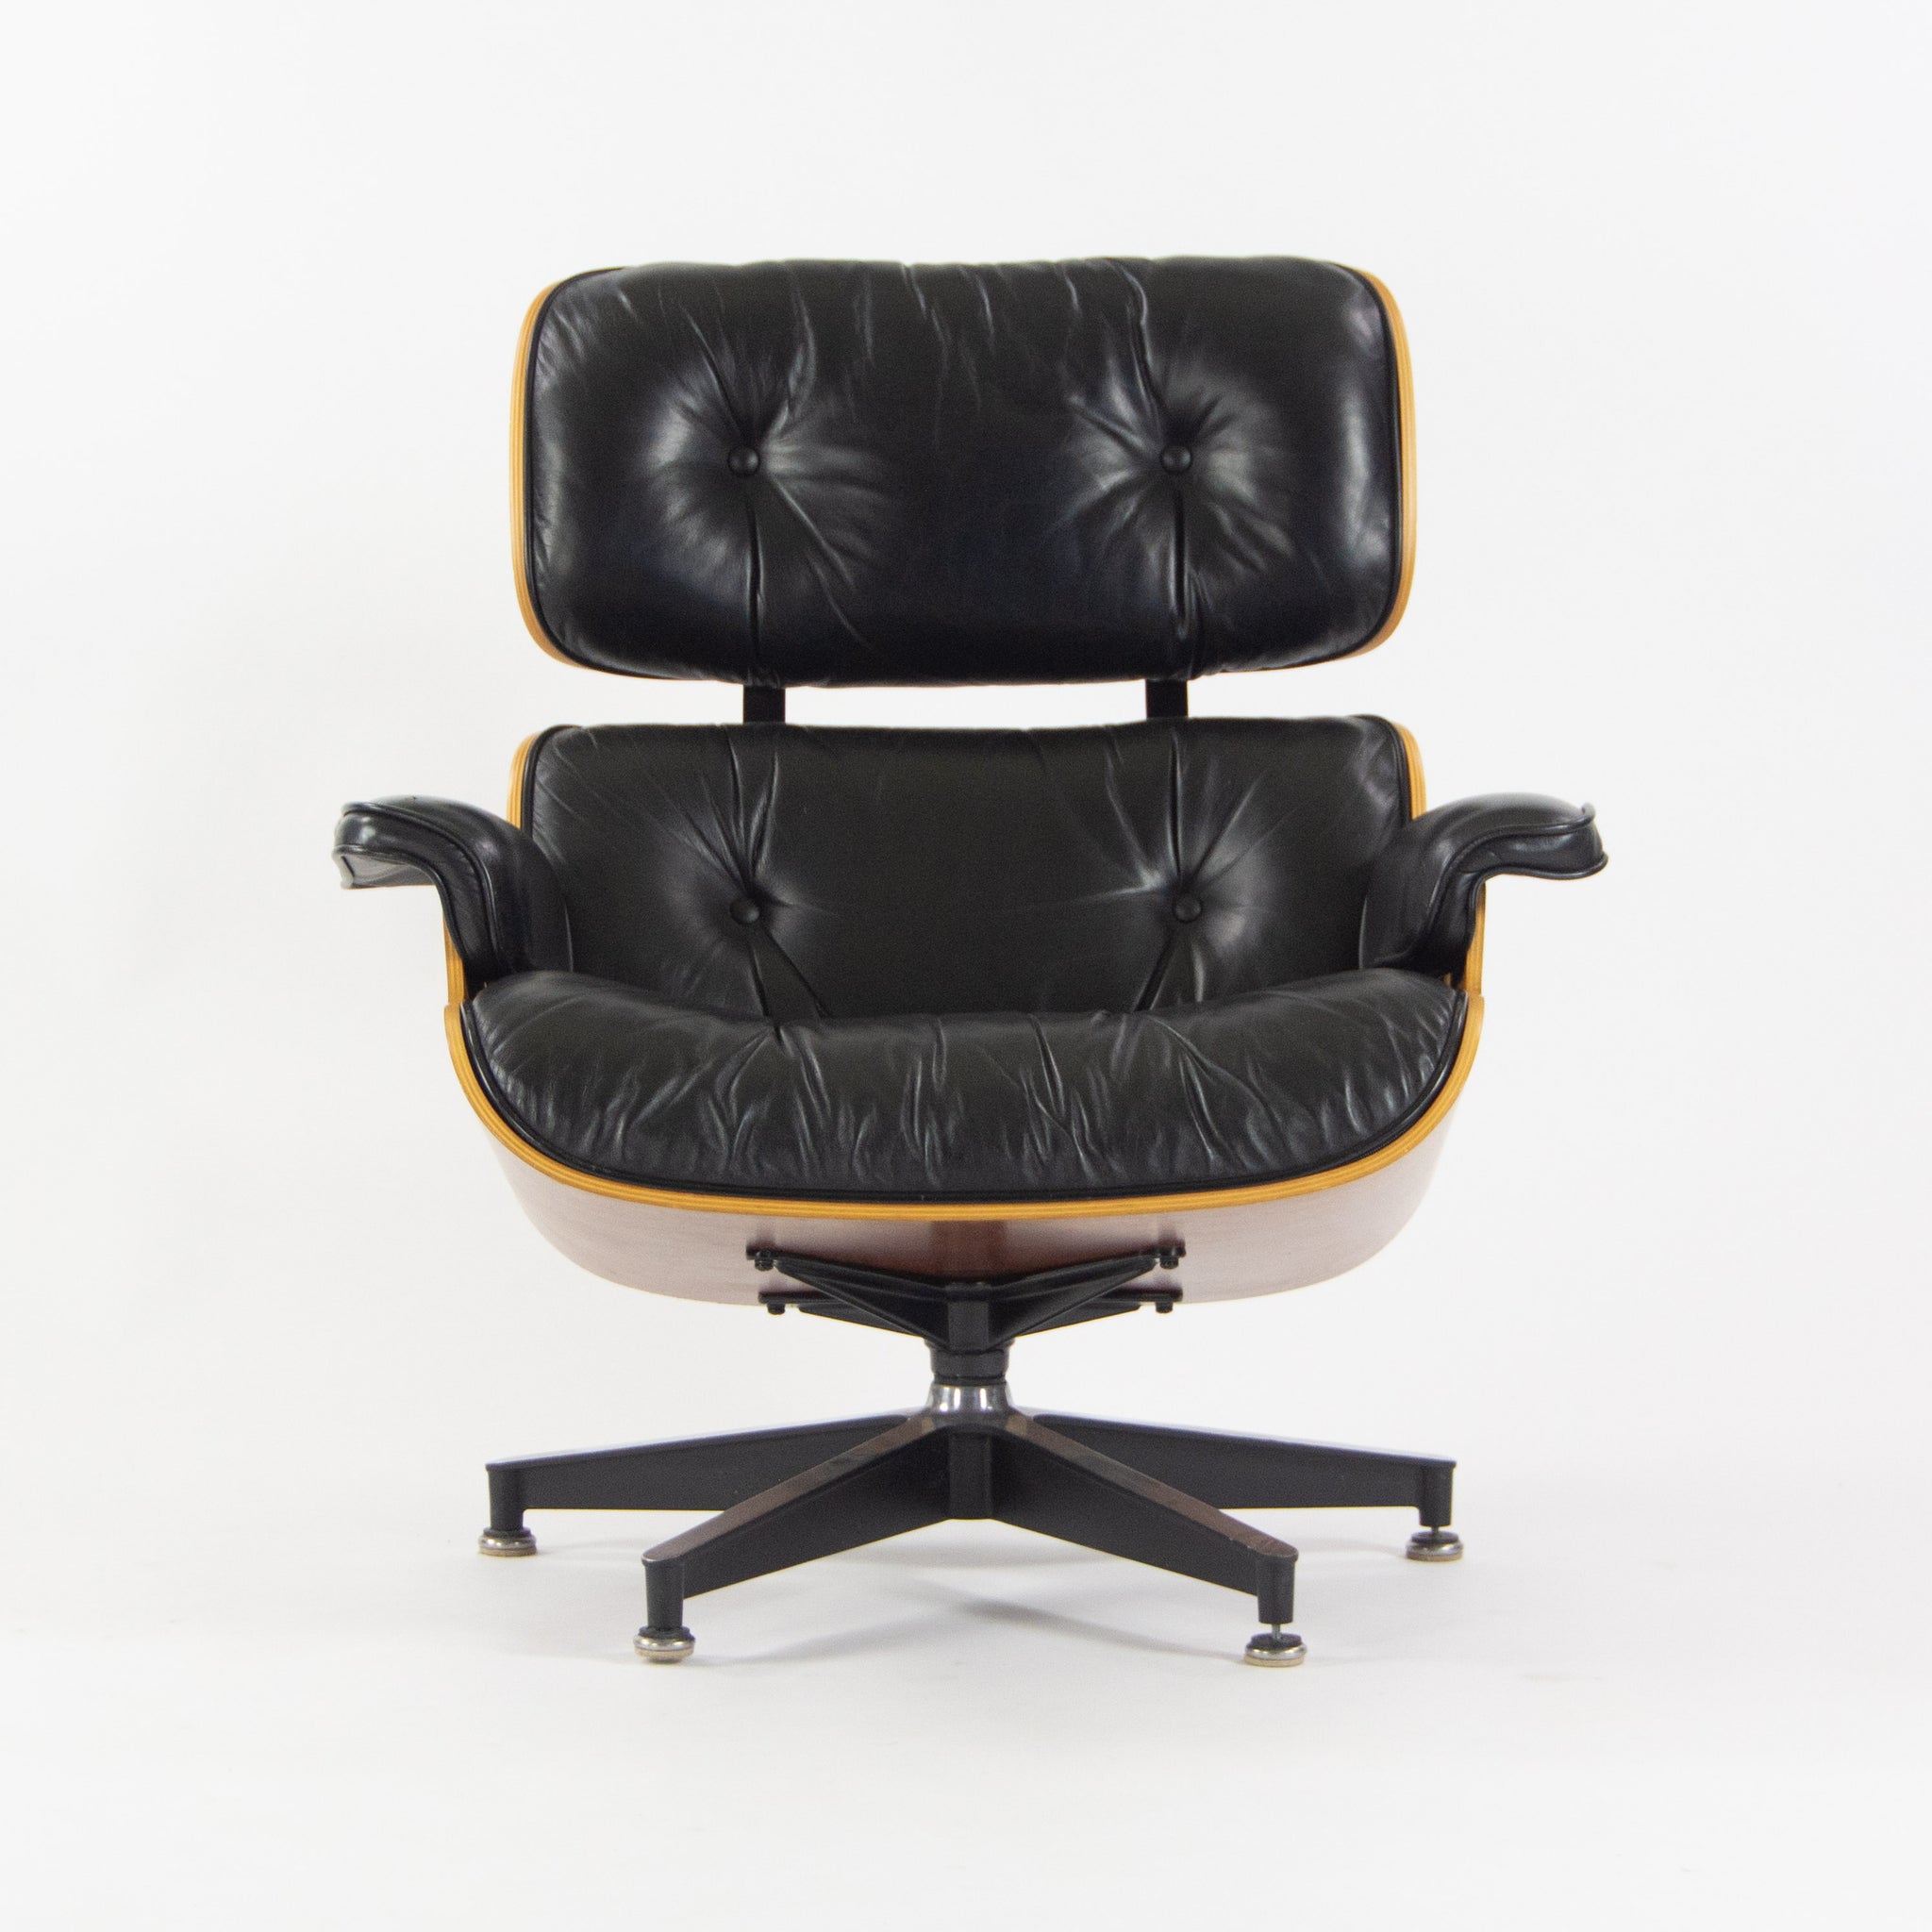 SOLD 1990s Herman Miller Eames Lounge Chair and Ottoman Cherry Black Leather 670 671